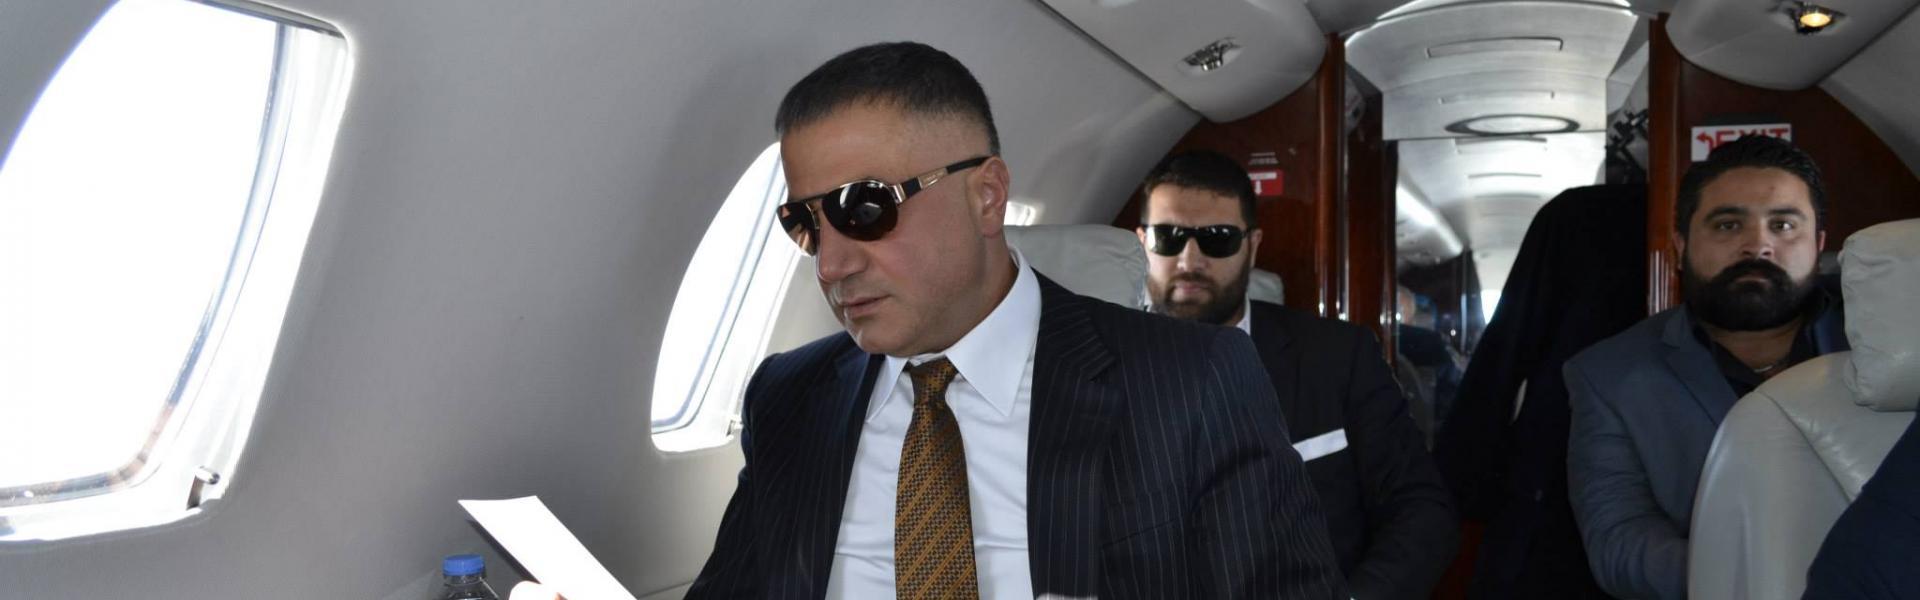 Sedat Peker to ‘take a long trip’ after secret location discovered 1